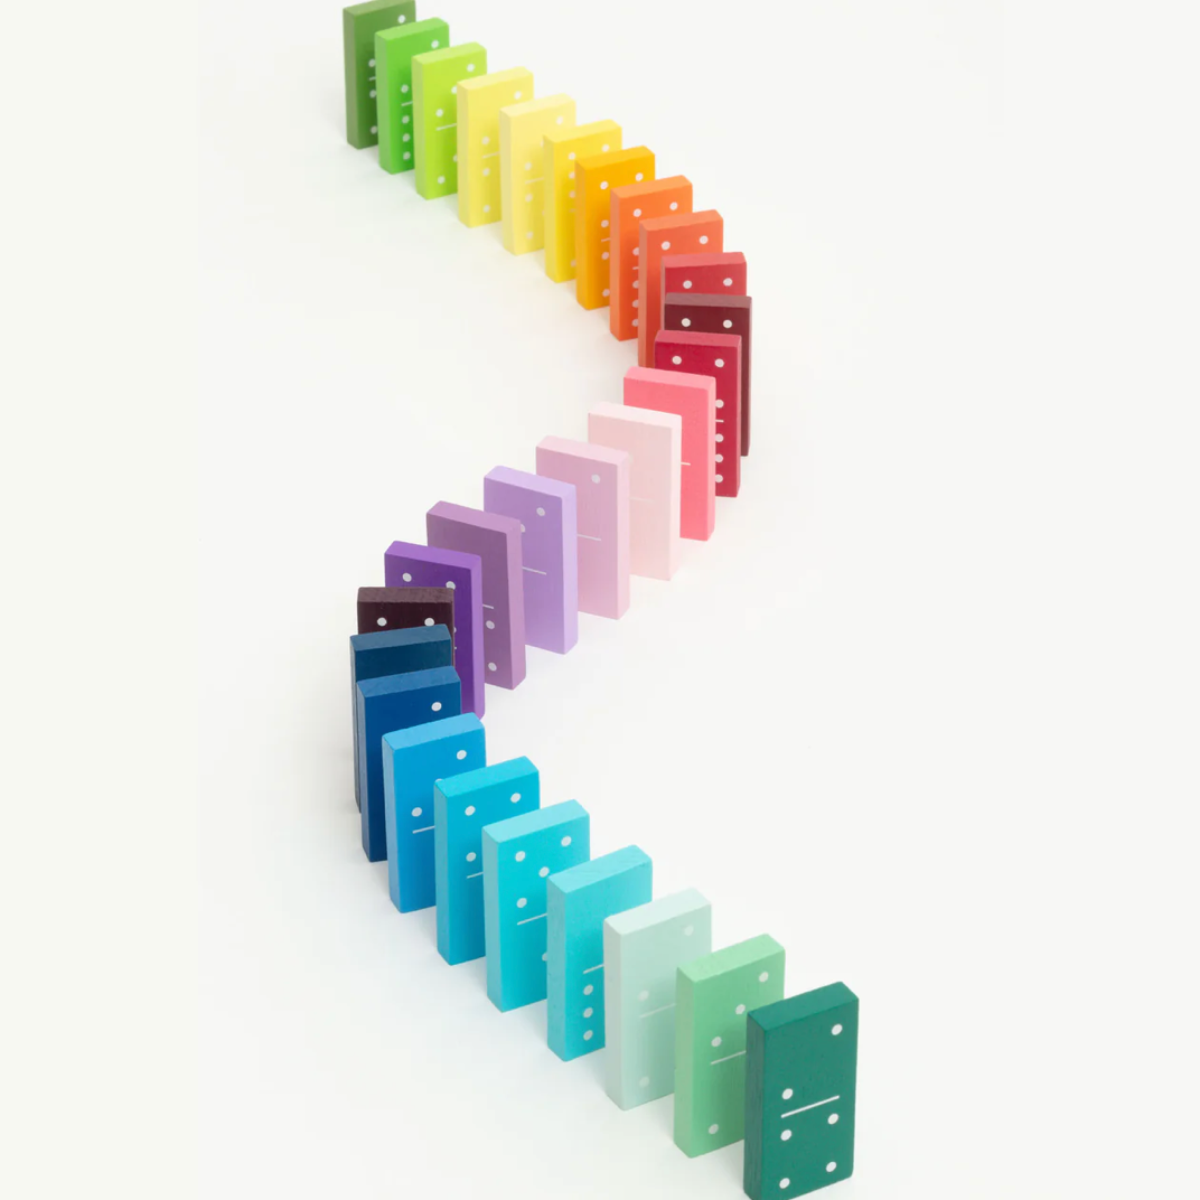 Color Dominoes